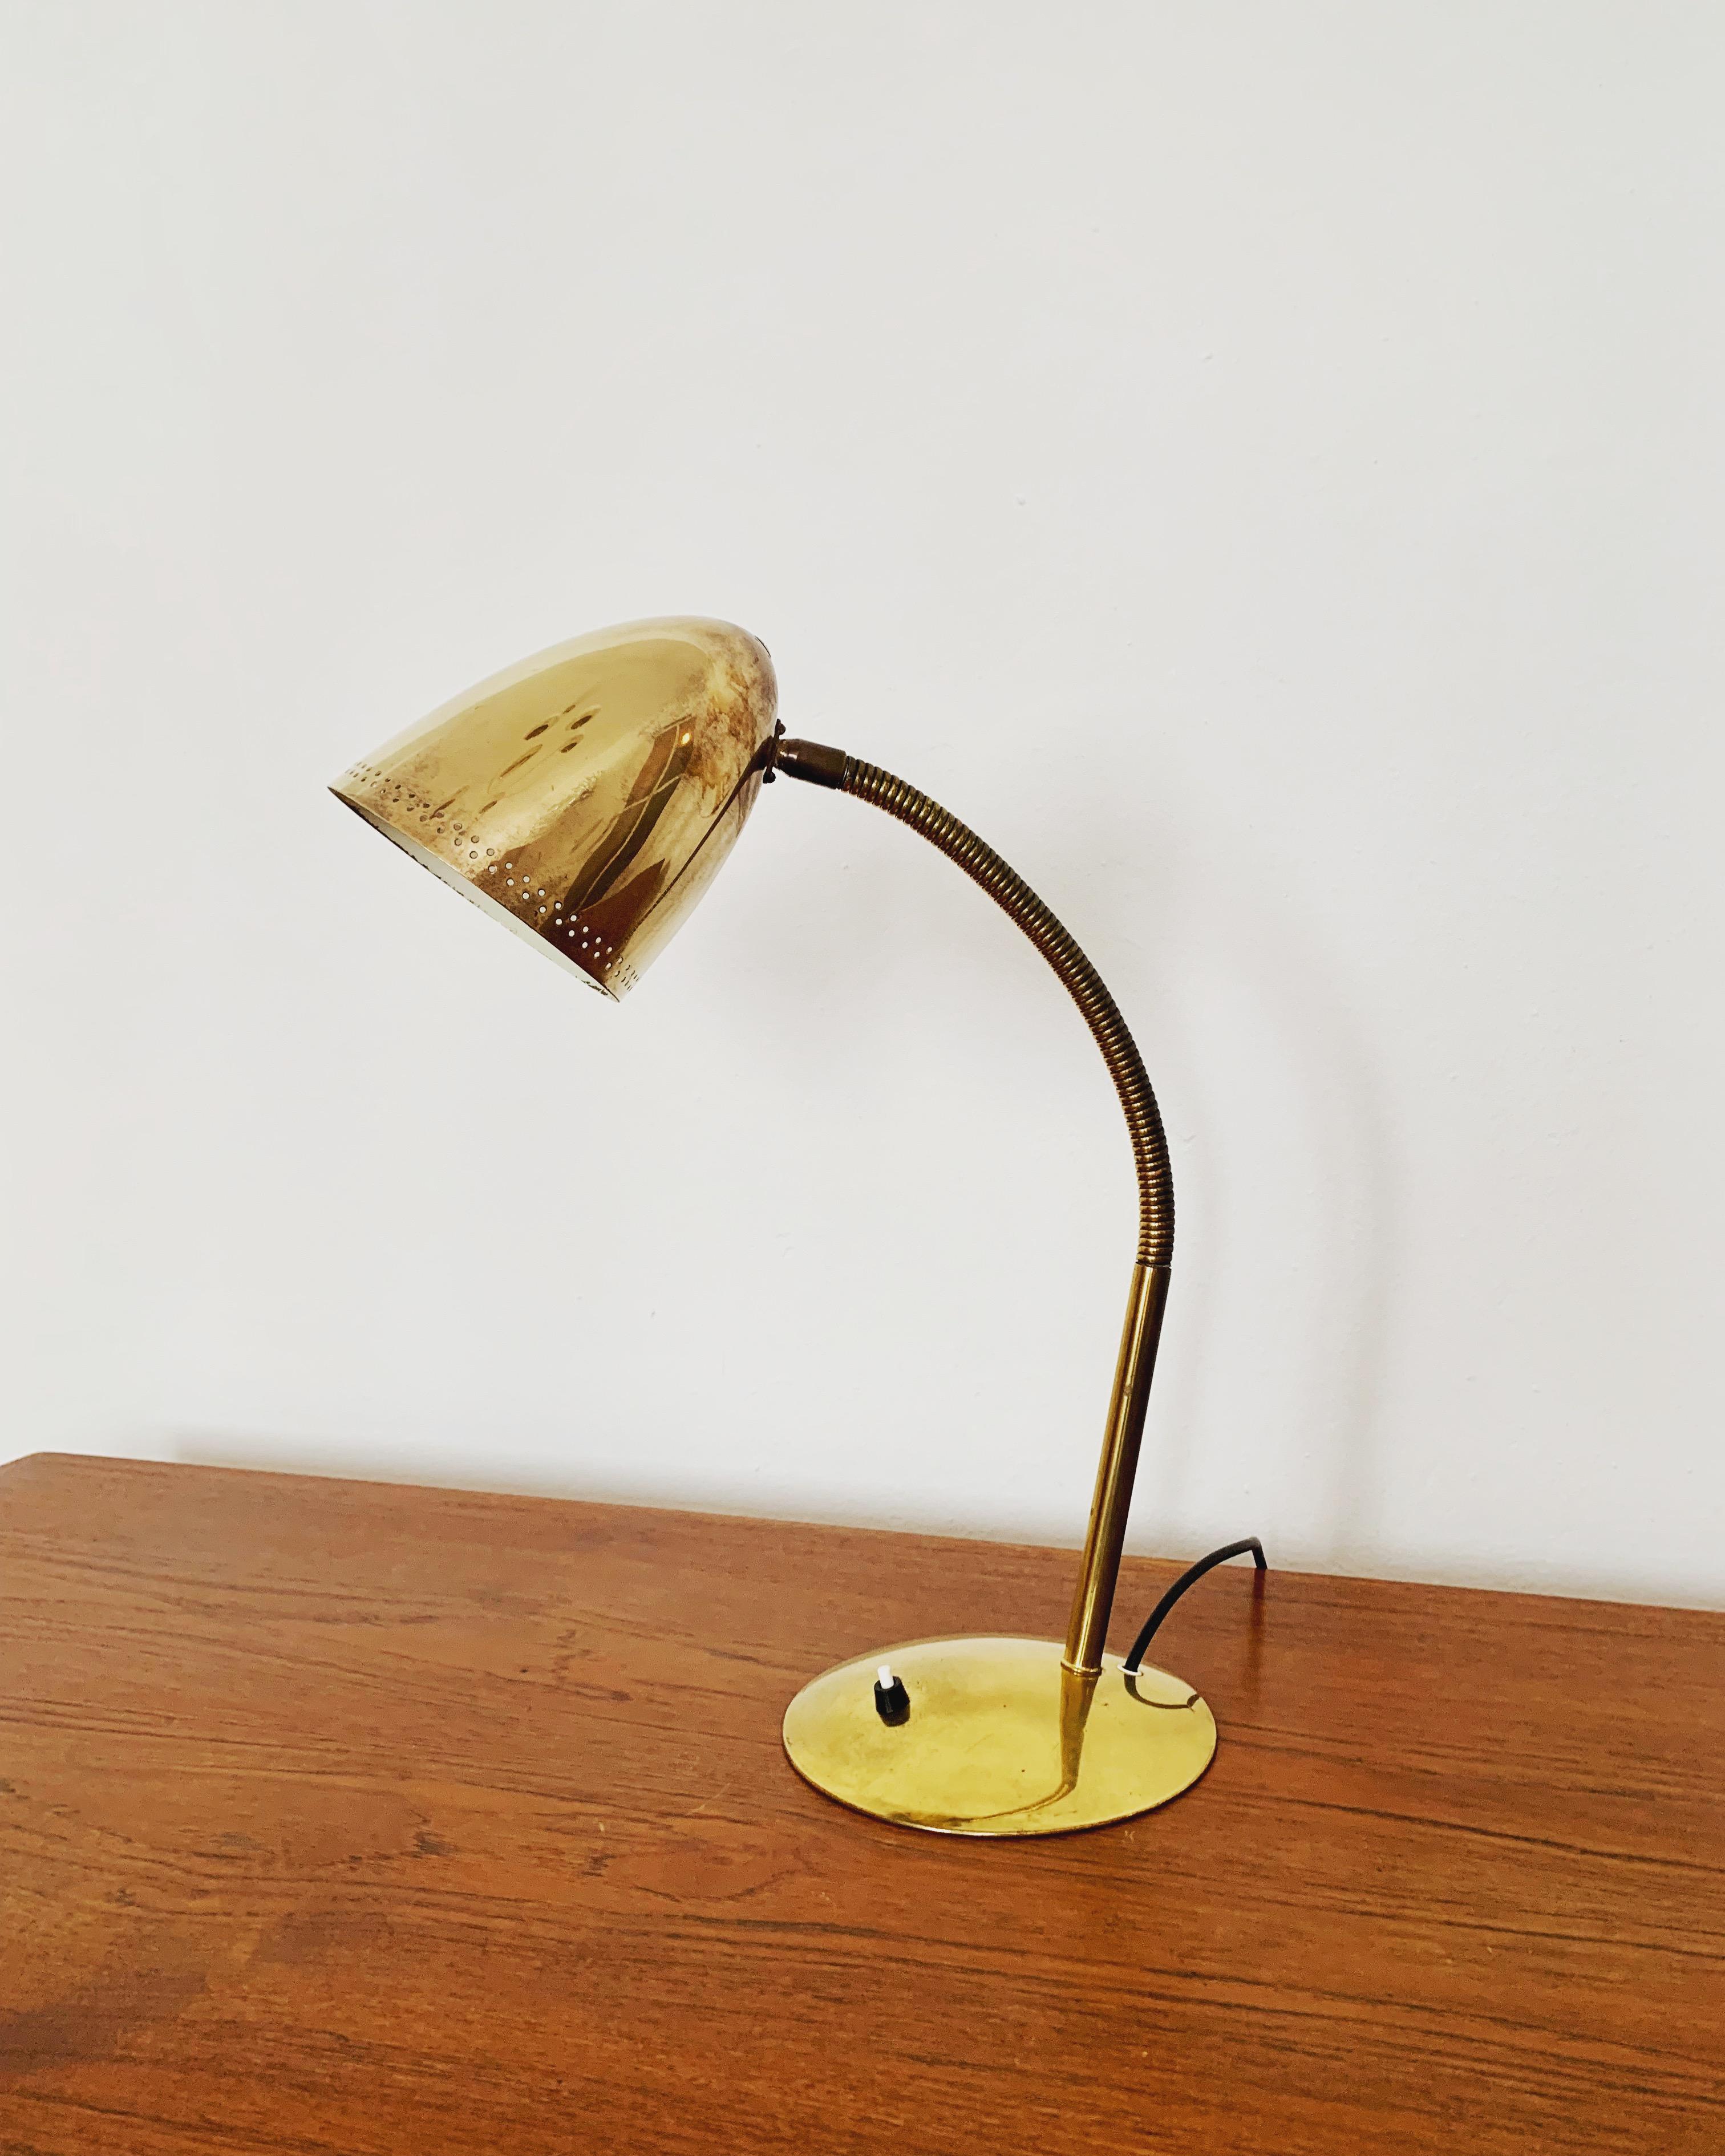 Extremely great and large table lamp from the 1950s by Kaiser Idell.
Fantastic mid-century design.
The combination of high-quality workmanship and loving details enriches every home.
The decorative holes in the lampshade create a beautiful play of